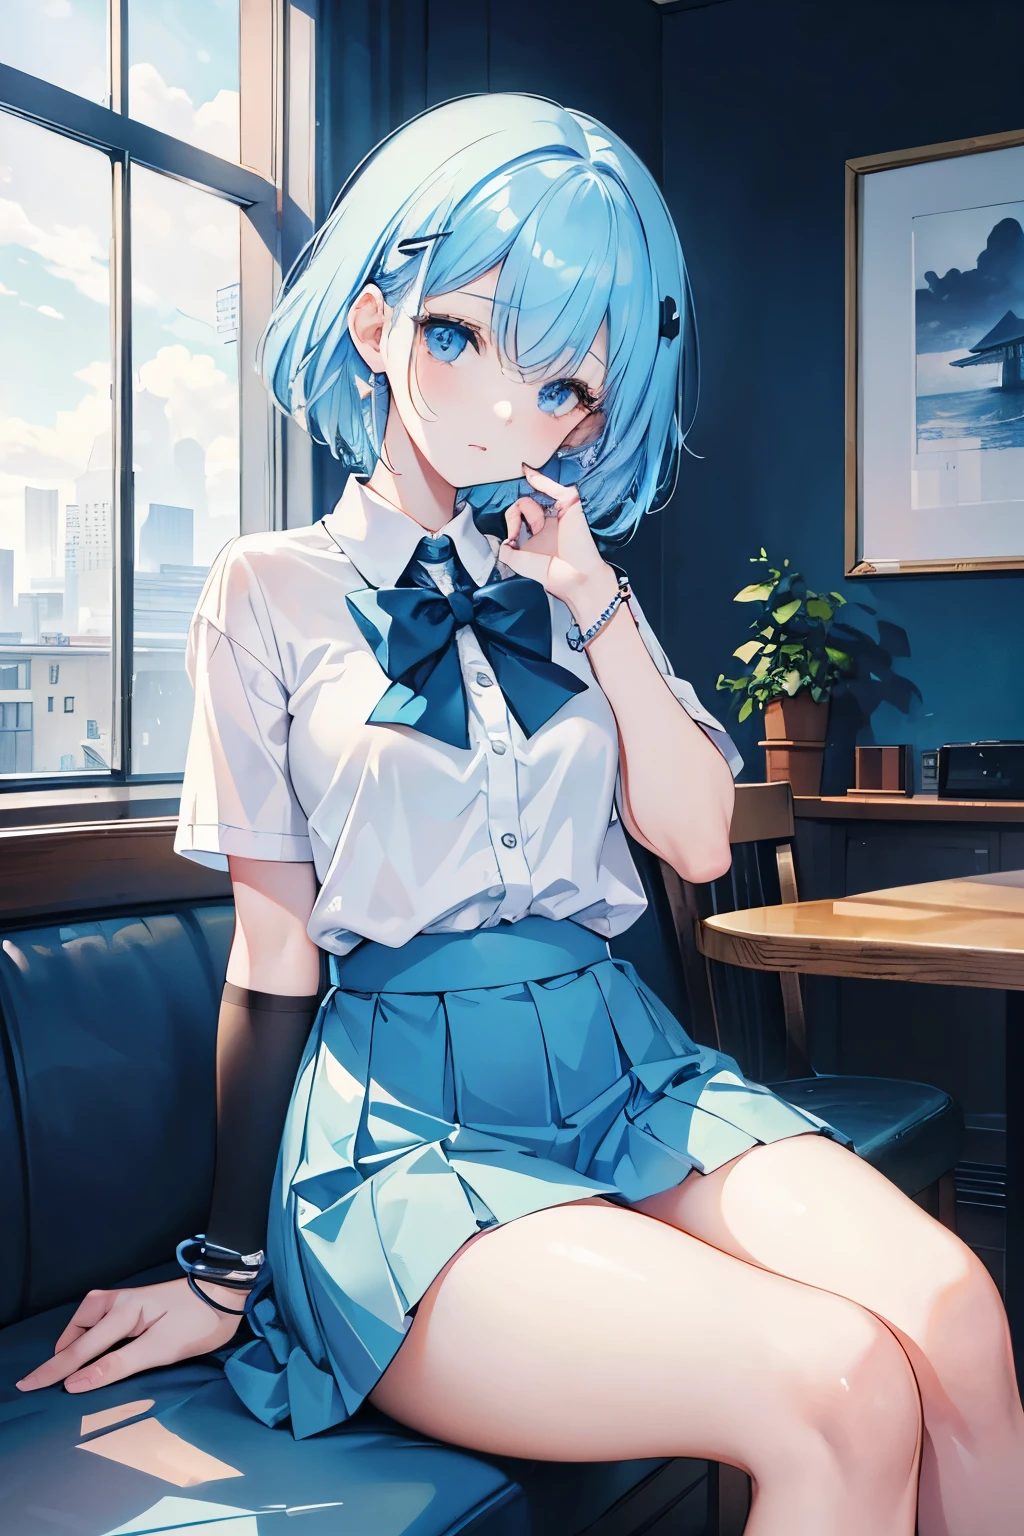 (Best quality, Masterpiece:1.3),  sitting in cafe, relaxed posture, natural light, cinematic background, User Chibi-Style, vivid Copic marker anime illustration, maintains a 3:1 head-to-body ratio, 1 girl, short hair, ice blue hair, bangs, blue eyes, future uniform, white and blue with black accents, glowing bracelet, glowing hairpin, no belongings, single object, white background for removing background, full body illustration.